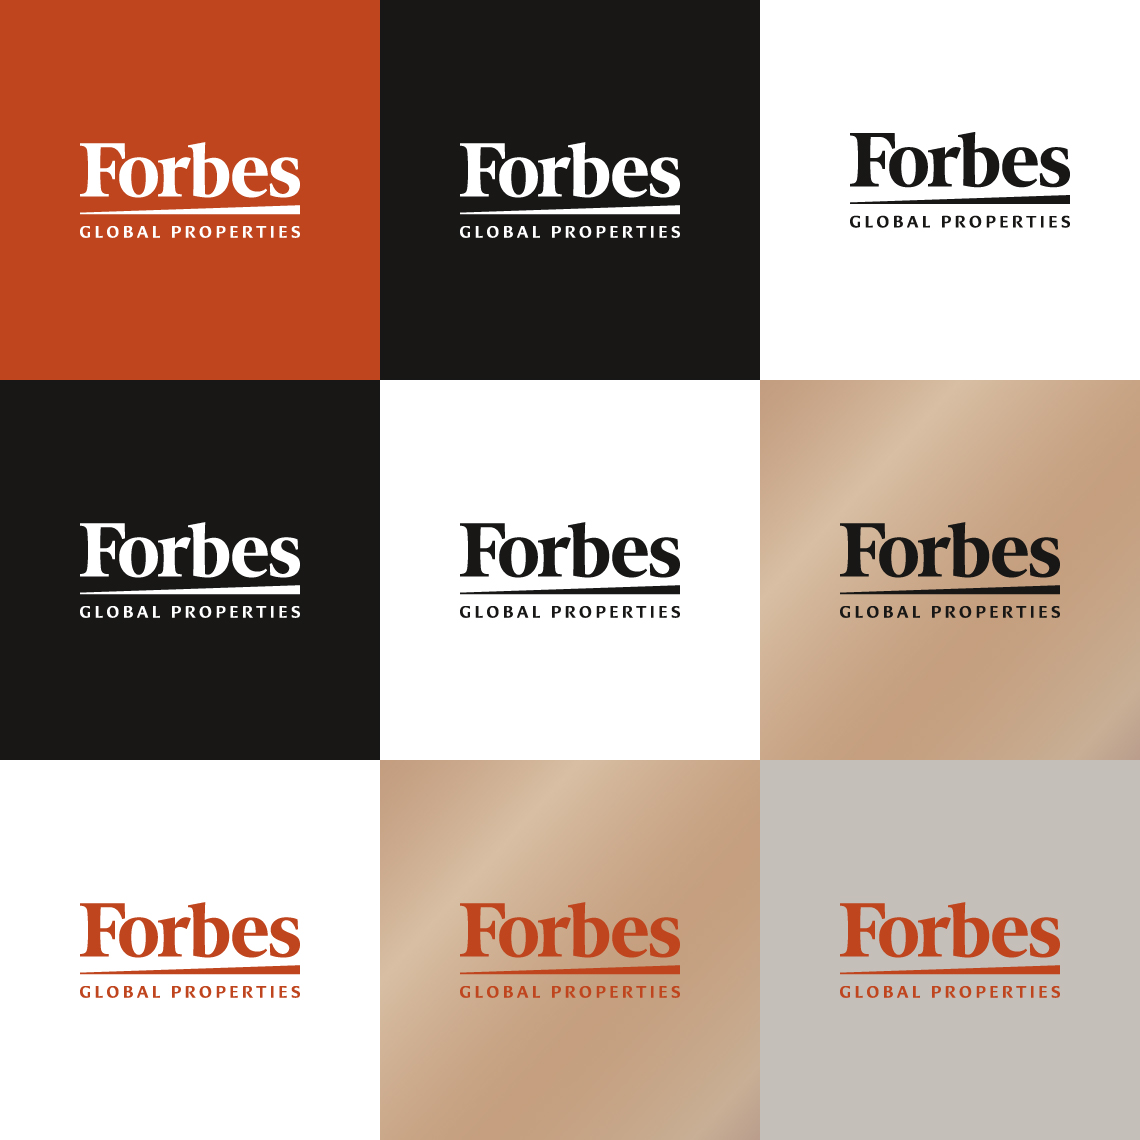 The logo developed for the Forbes brand, applying the different color combinations of the palette and showing the allowed uses.